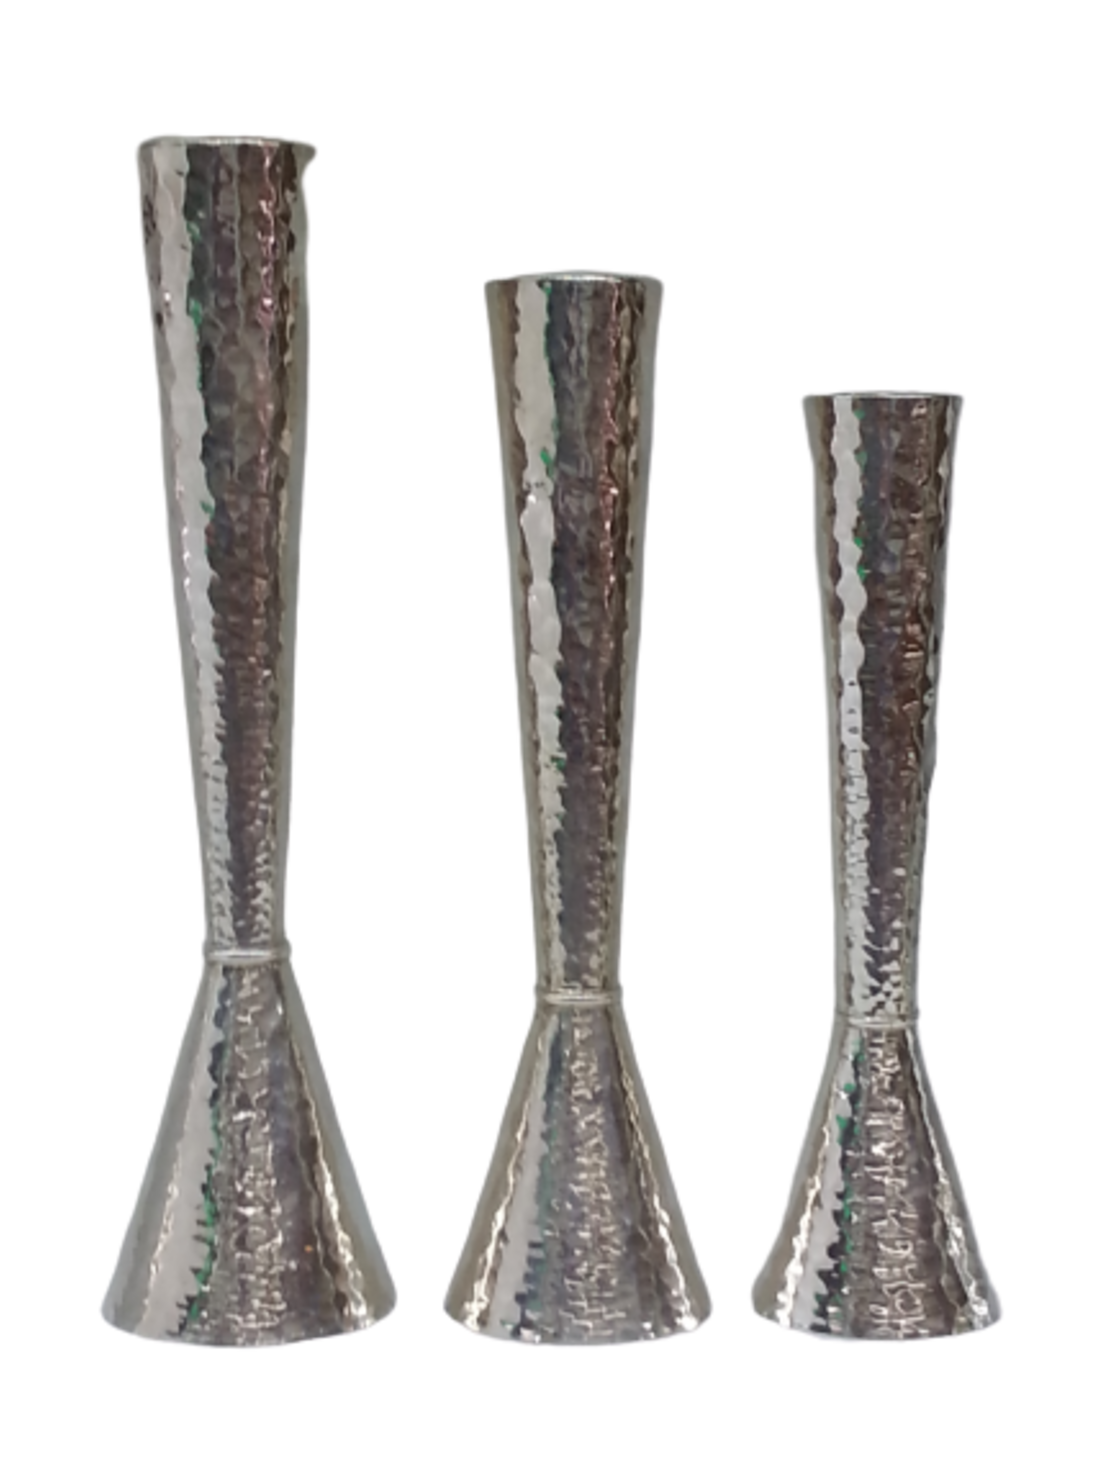 Cone candlesticks in 7 different sizes, pure silver